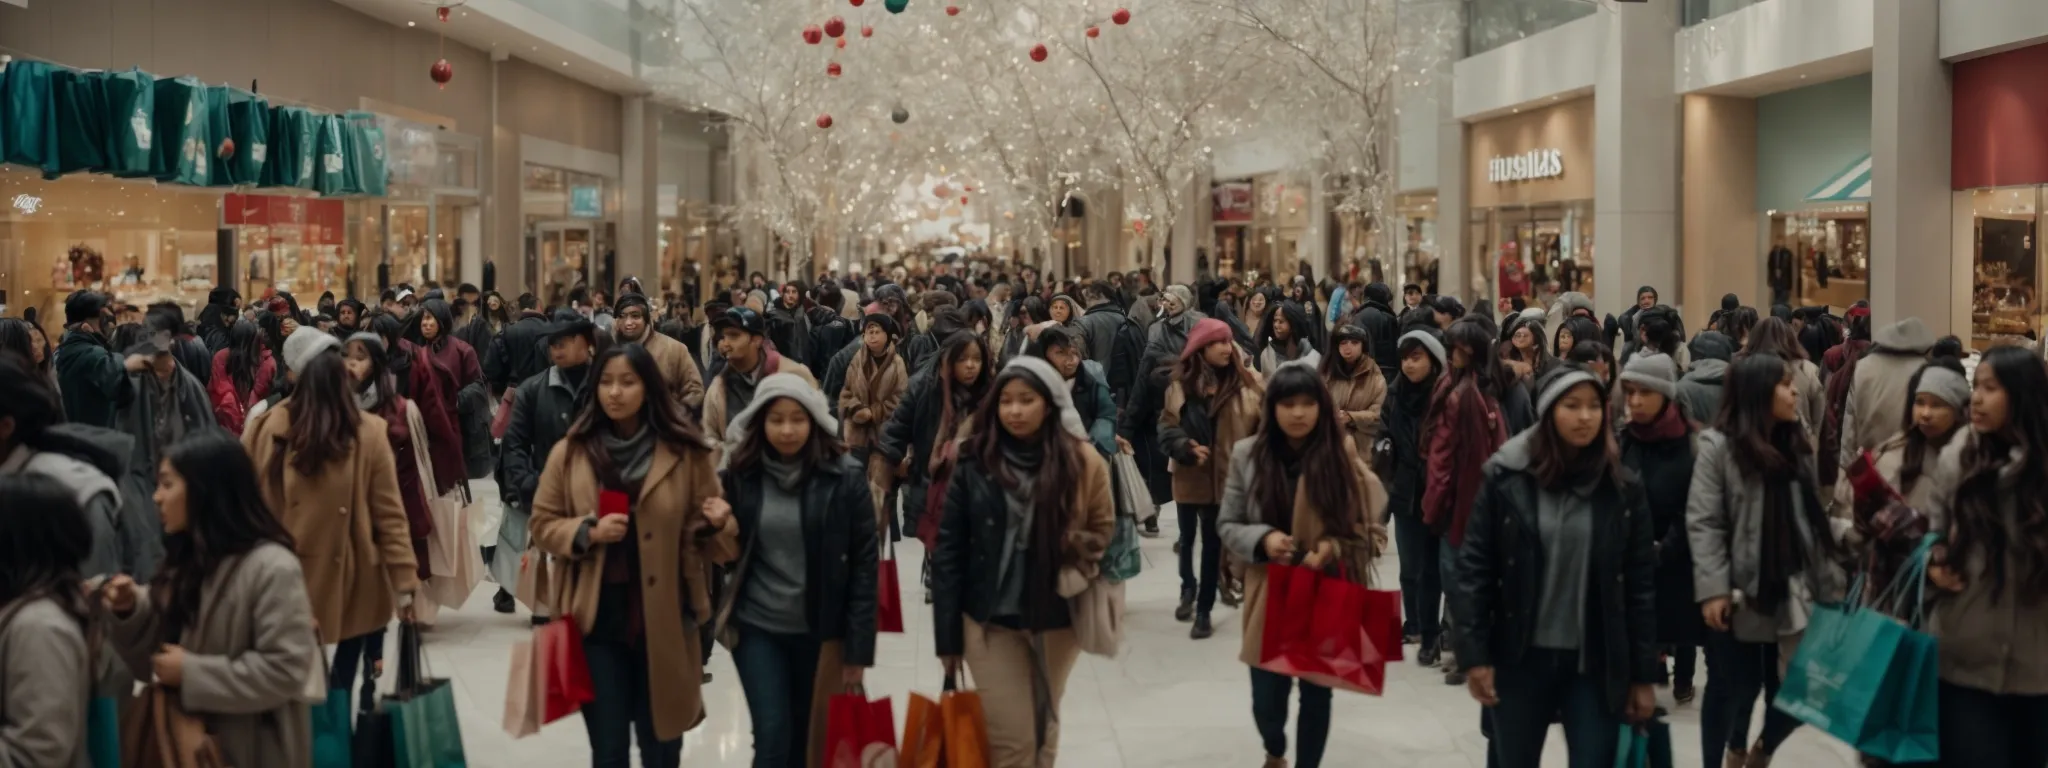 a bustling black friday shopping crowd in a mall, with shoppers carrying colorful bags walking past decorated storefronts.